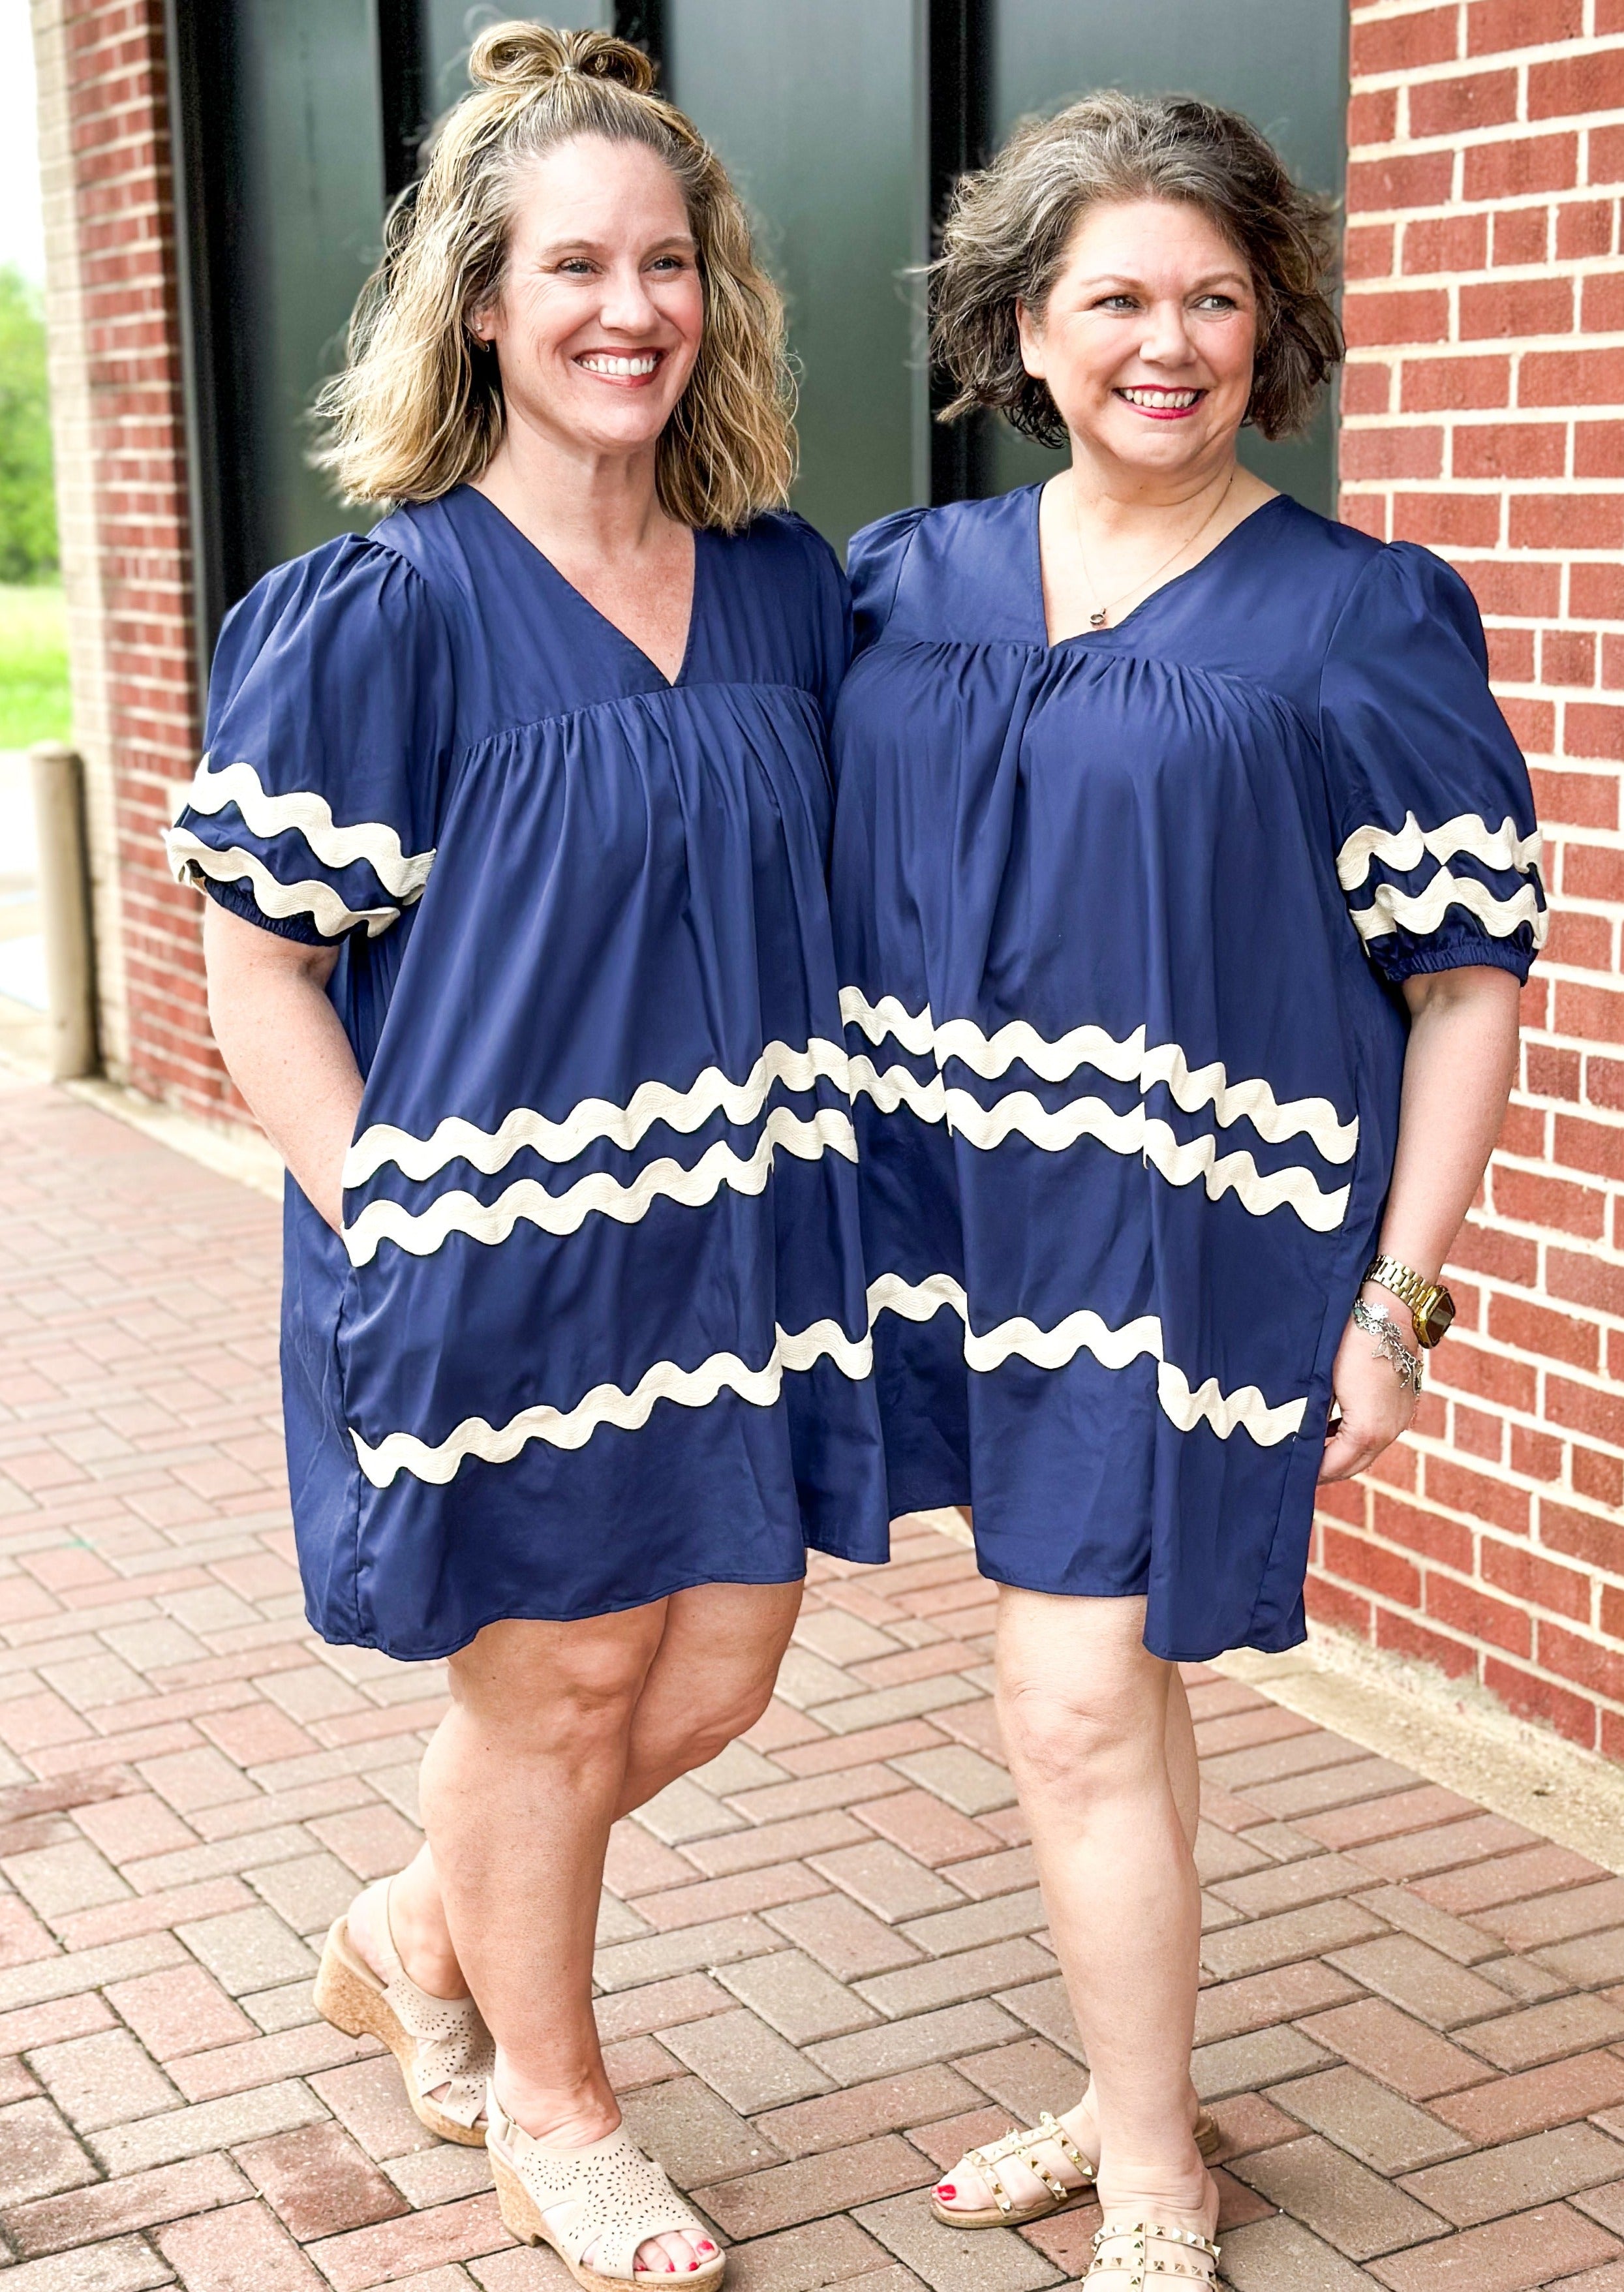 Navy Rick Rack v-neck short sleeve dress - cream rick rack around bottom of short sleeves and on the front only of the dress - pockets